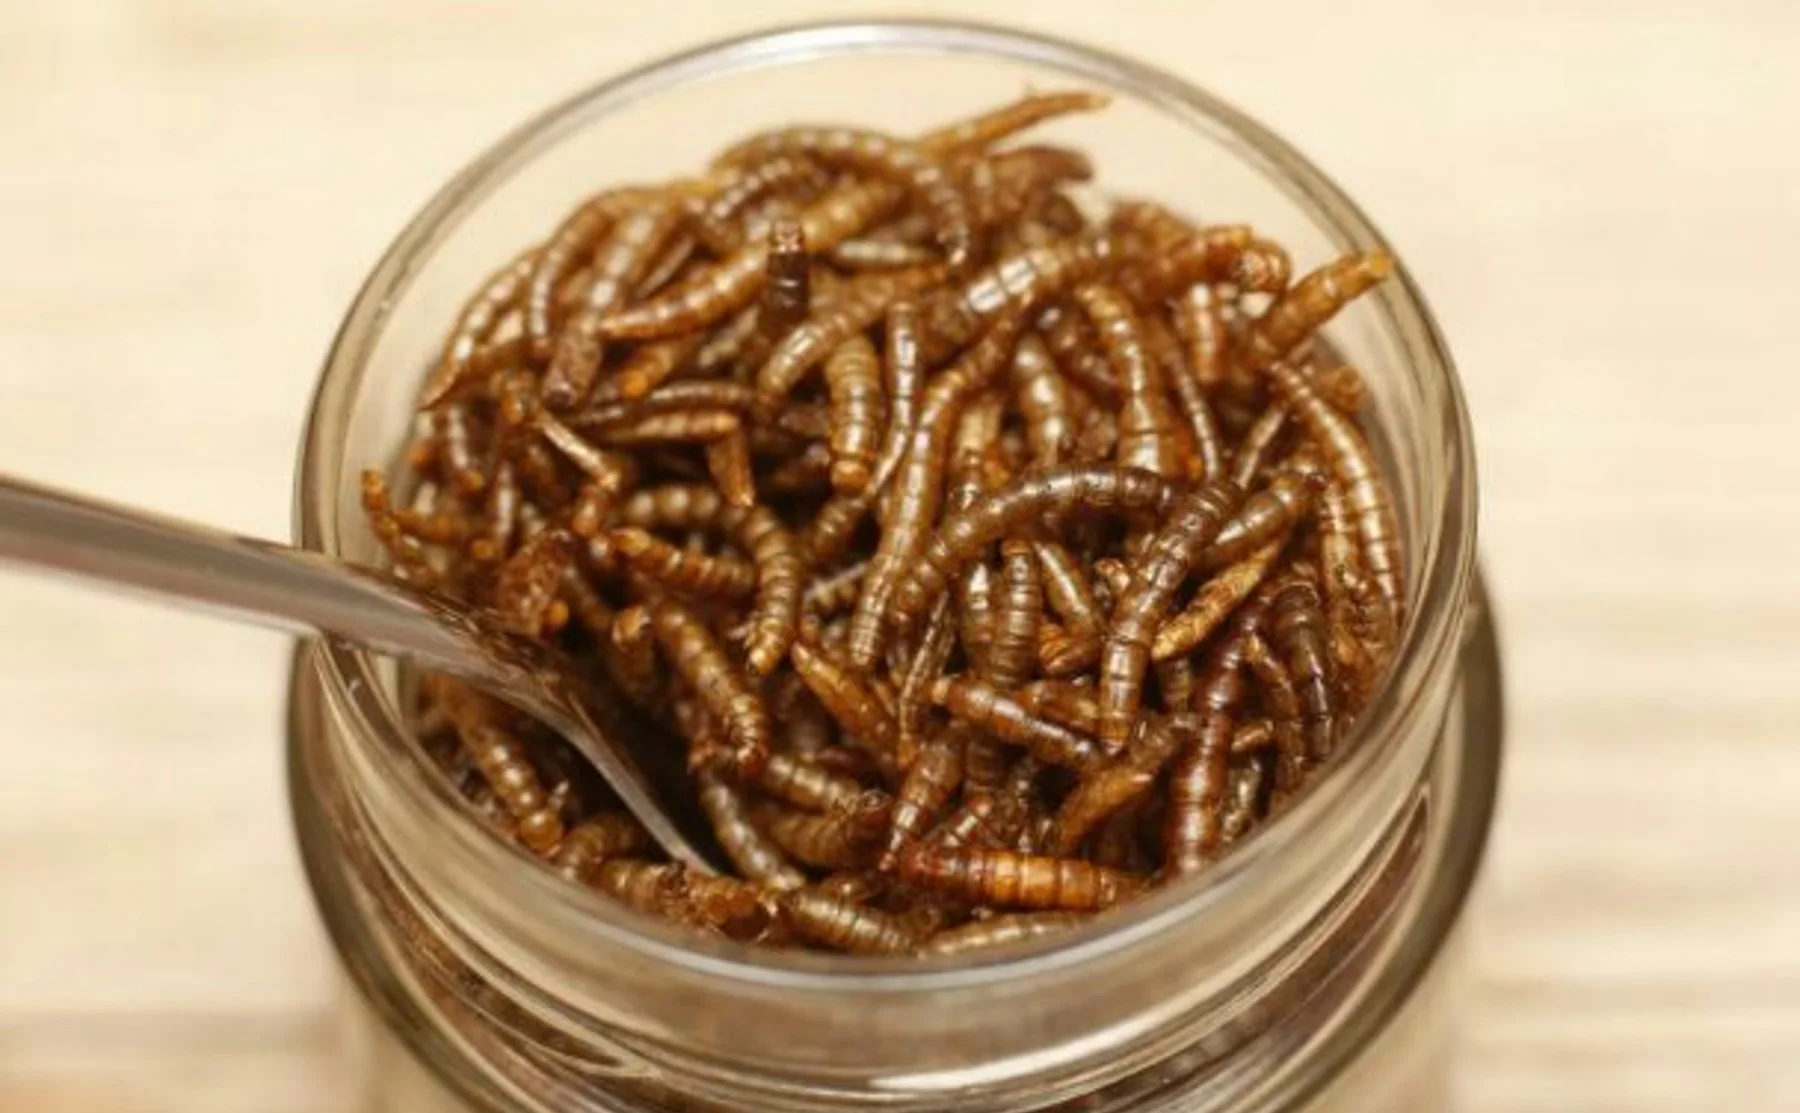 Mealworms lunch testing in Mathallen #Oslo  - 1204581